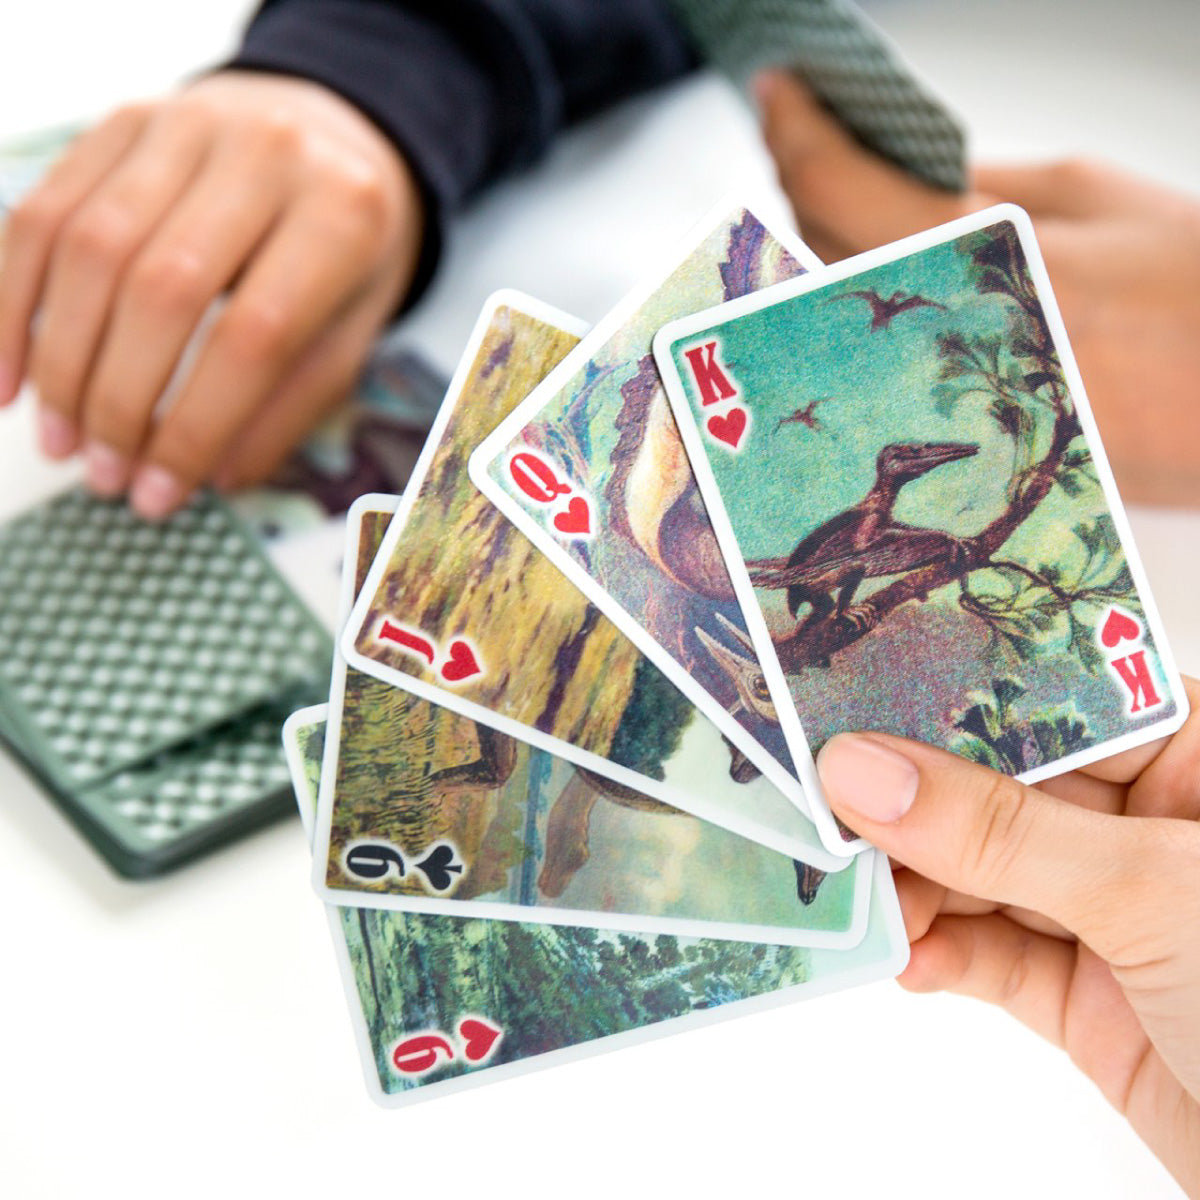 Dinosaurs 3D Lenticular Playing Cards from Kikkerland